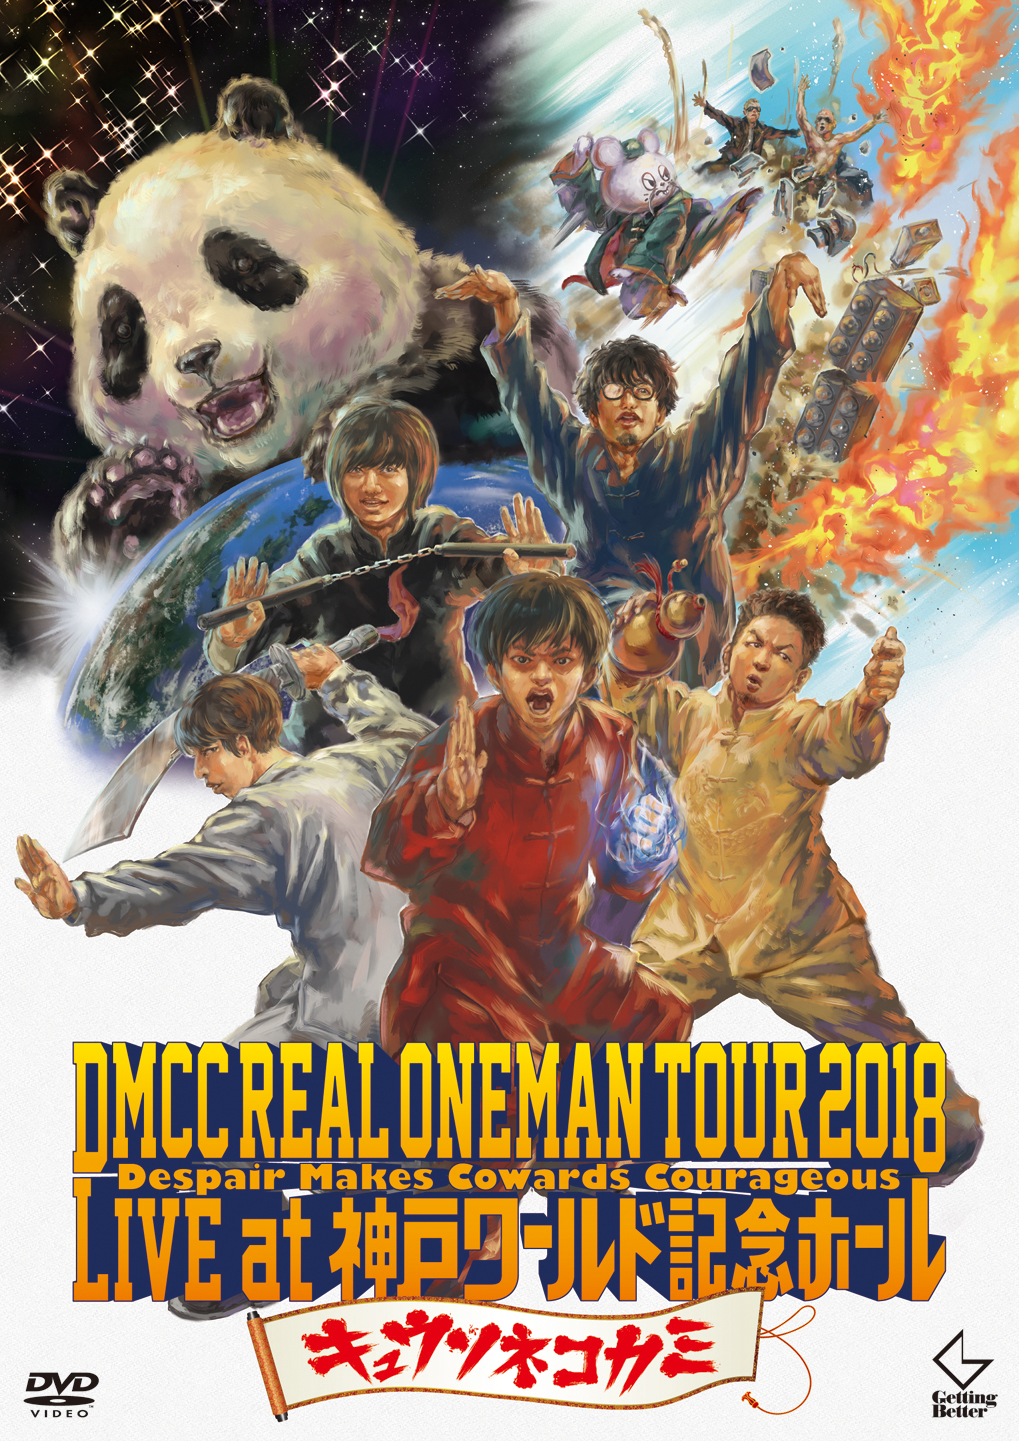 DMCC REAL ONEMAN TOUR 2018 -Despair Makes Cowards Courageous Live at 神戸ワールド記念ホール